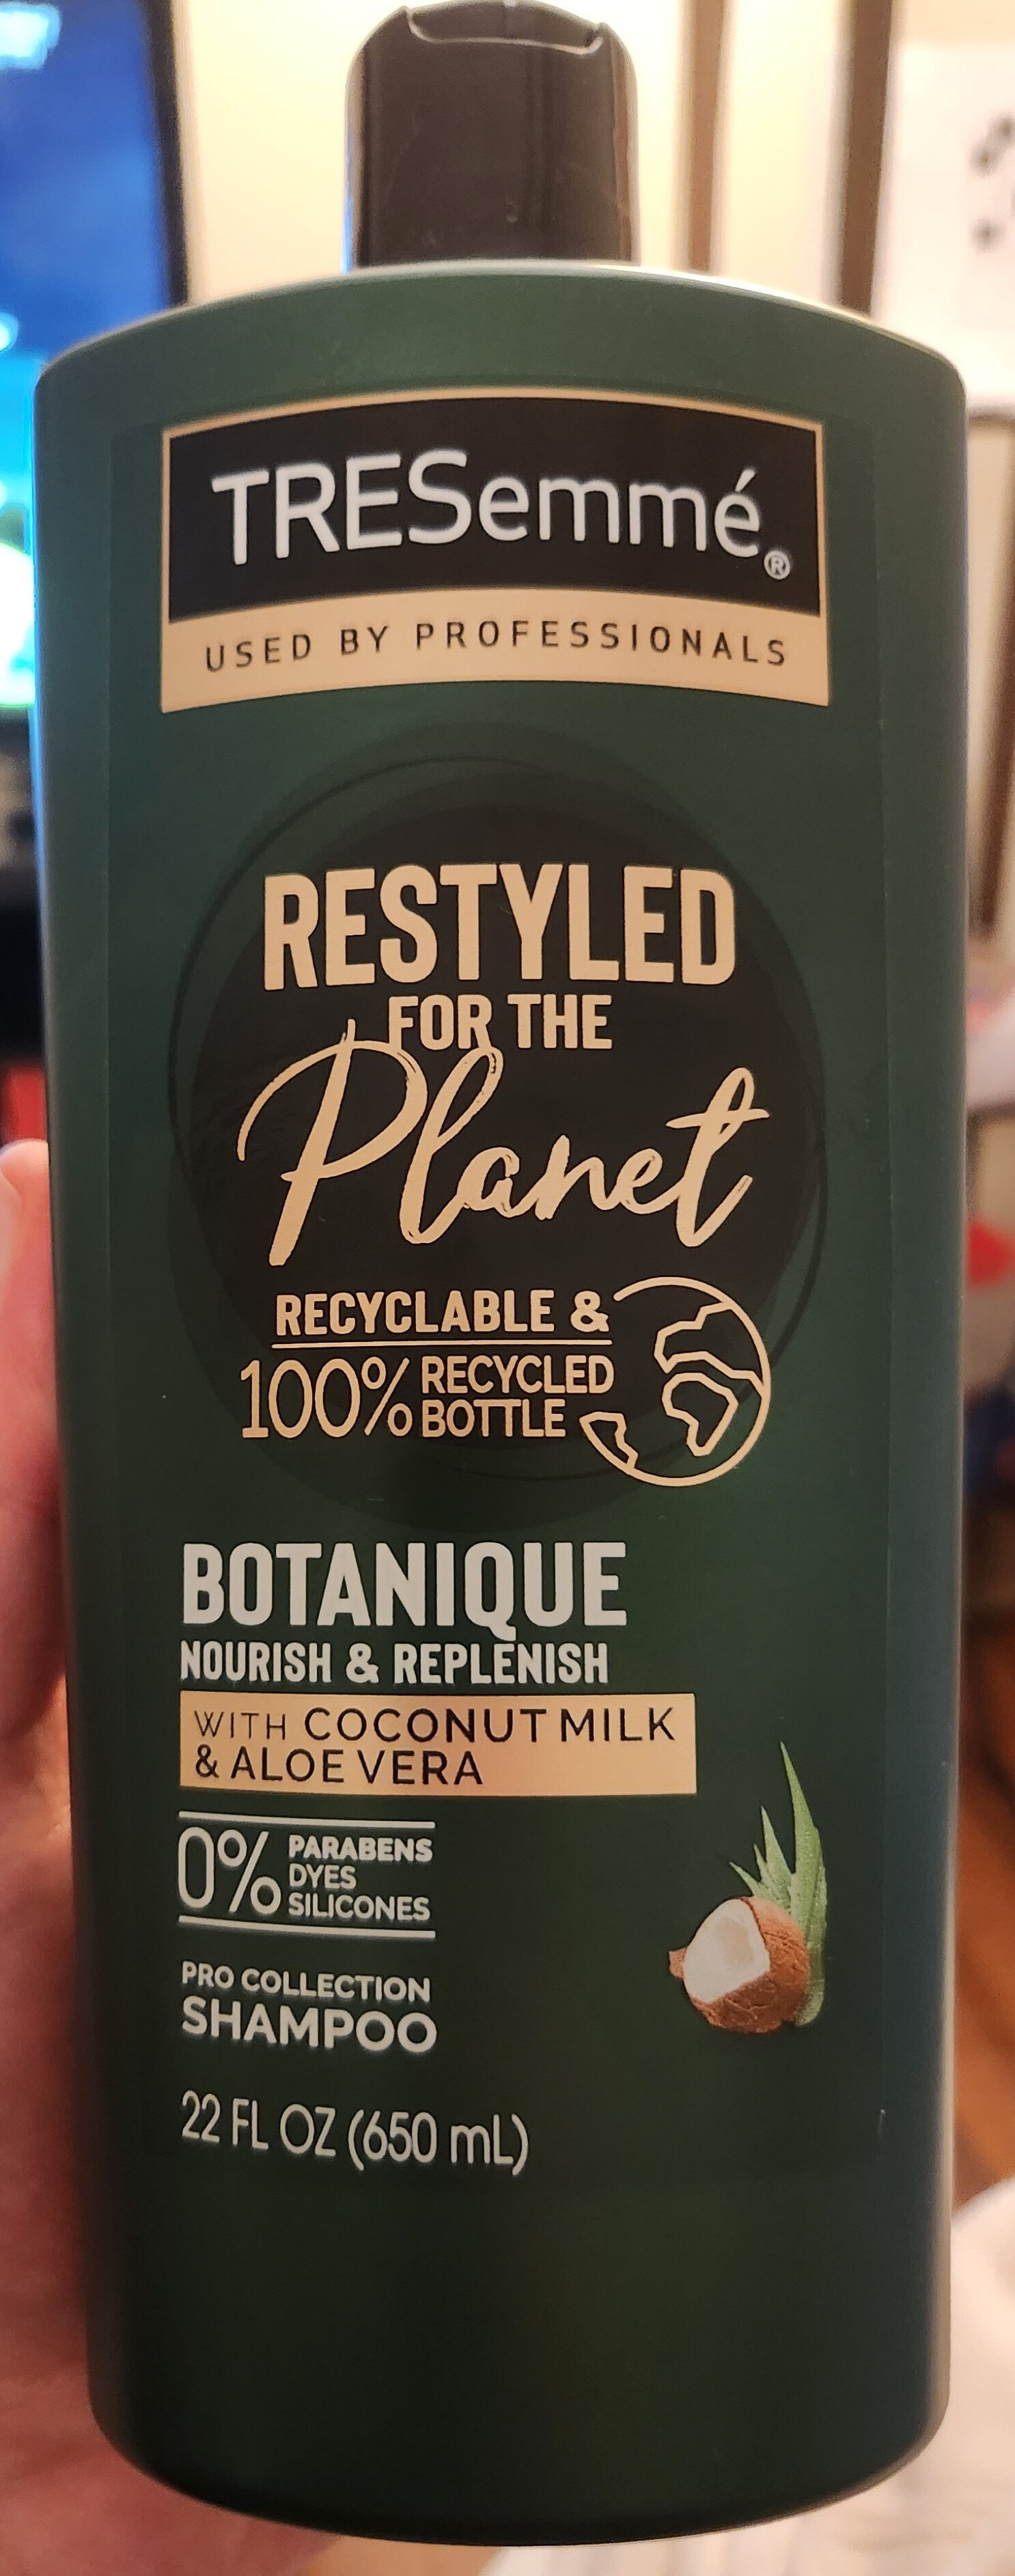 'Restyled for the Planet' Botanique Shampoo with Coconut Milk & Aloe Vera - Product - en